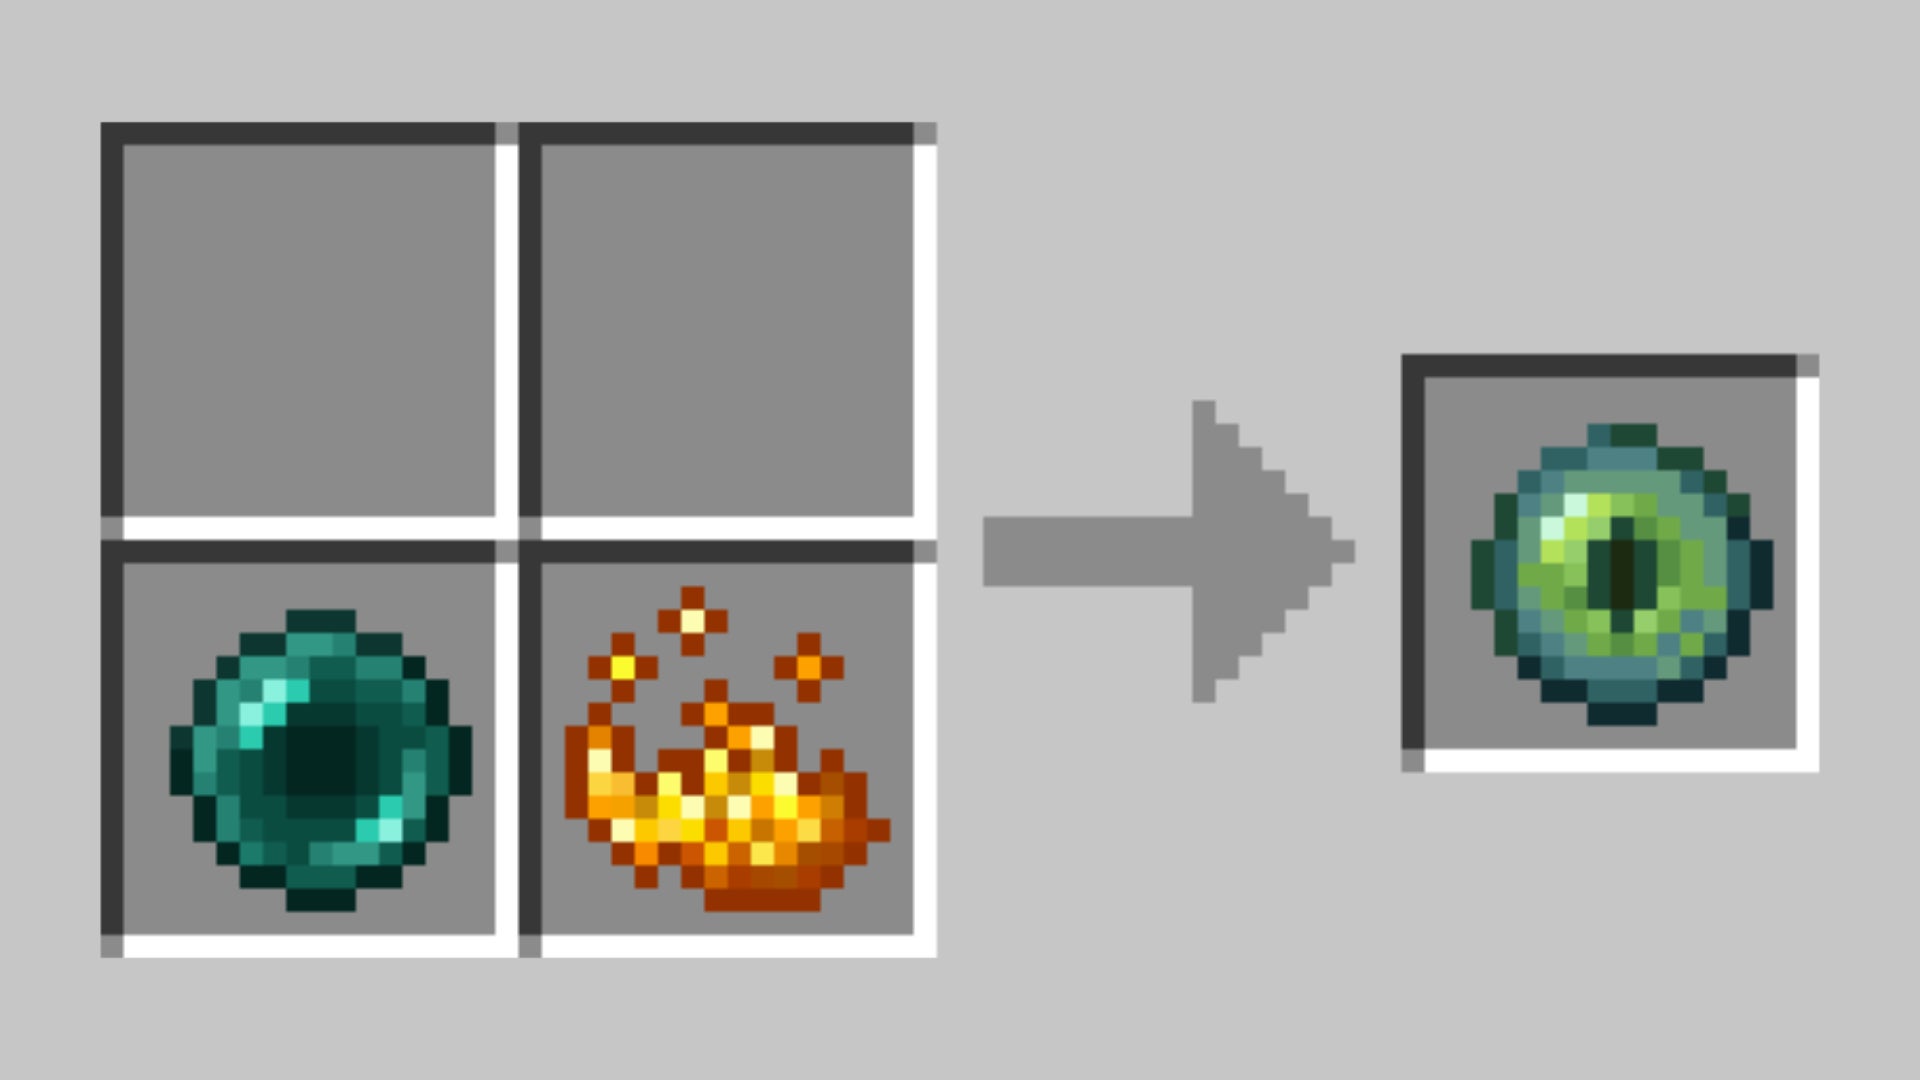 The recipe for crafting an Eye Of Ender out of an Ender Pearl and Blaze Powder in Minecraft.